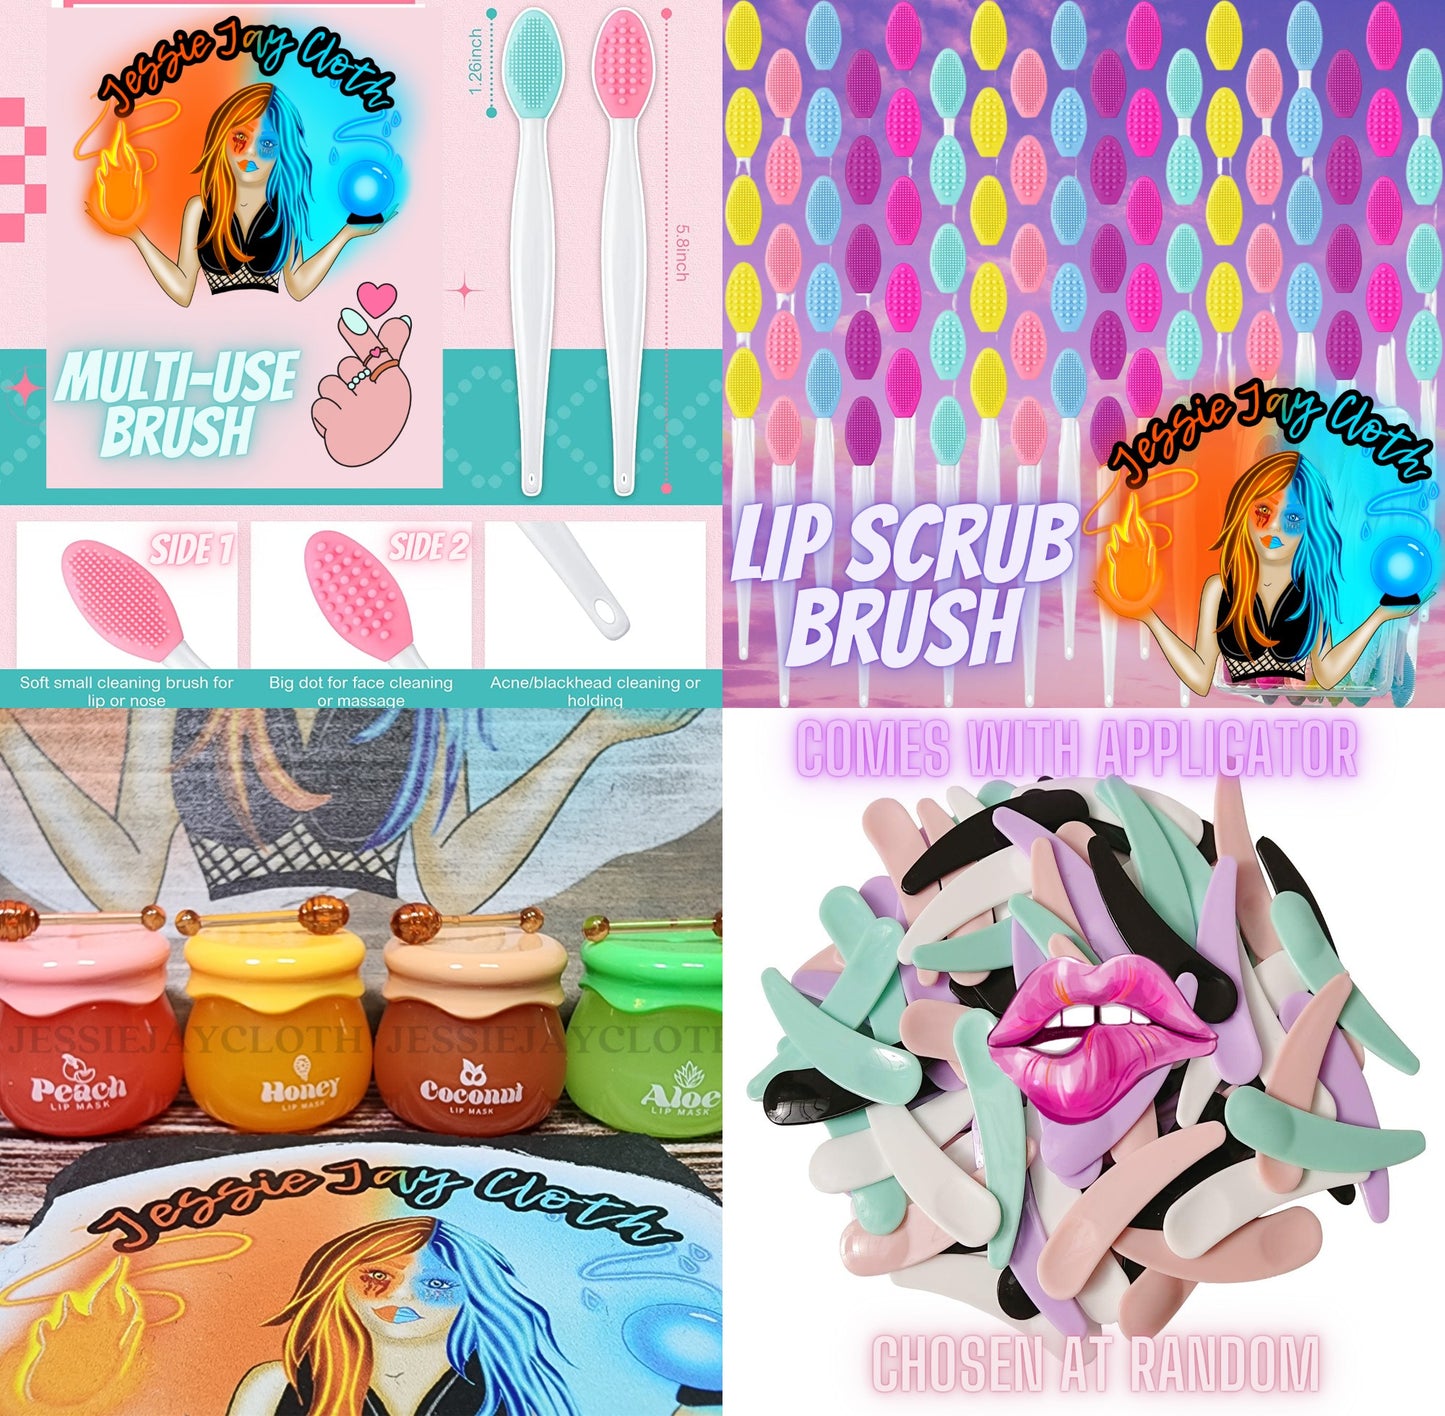 X-Large Beauty Scoop | Bulk Mystery | NEW Handmade items added to each scoop